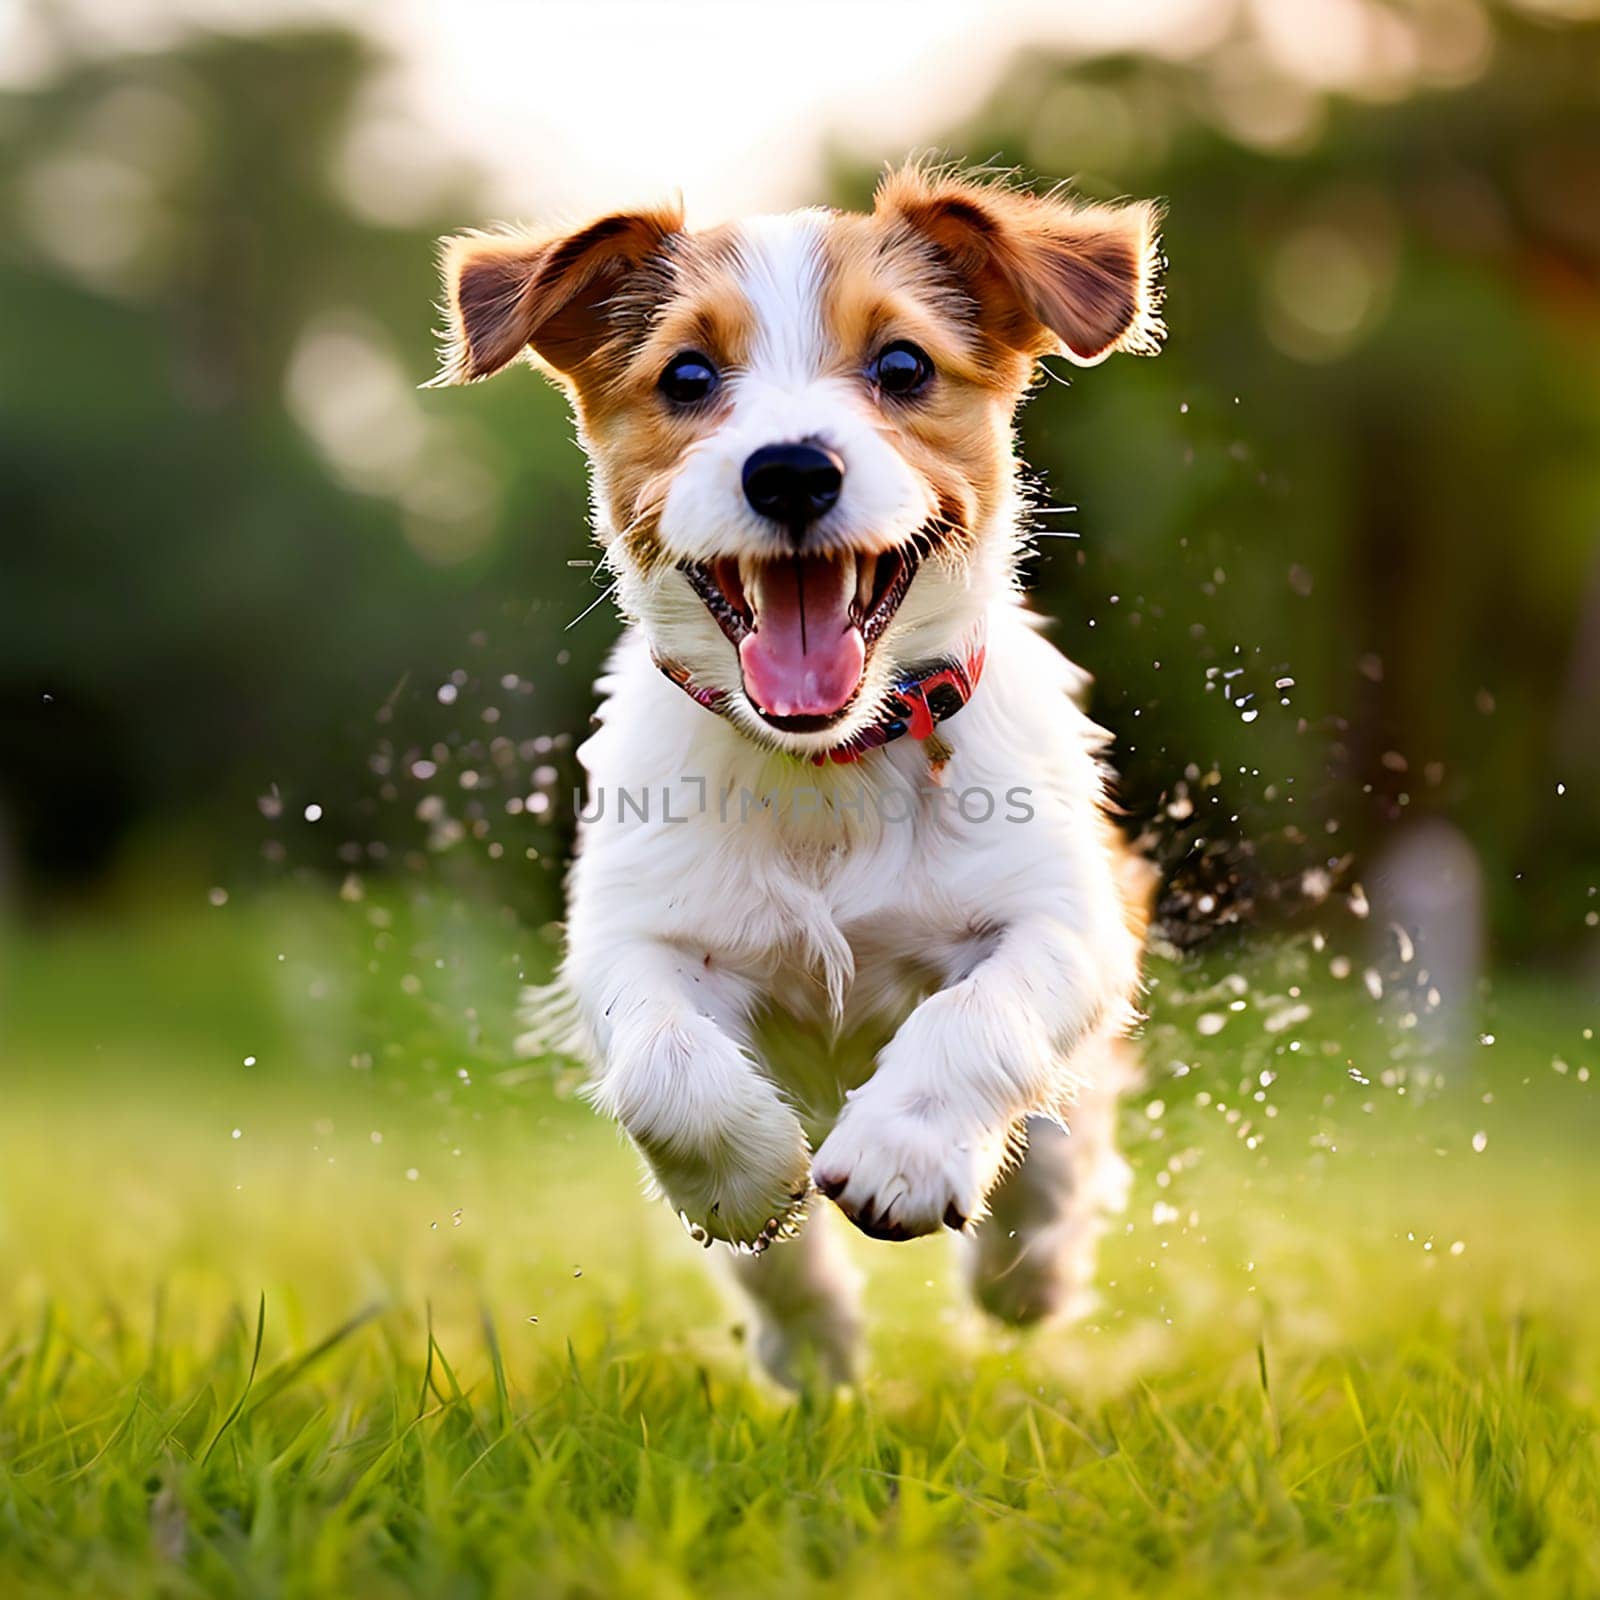 Joyous Pup: Playful Dog Running and Jumping in the Grass by Petrichor